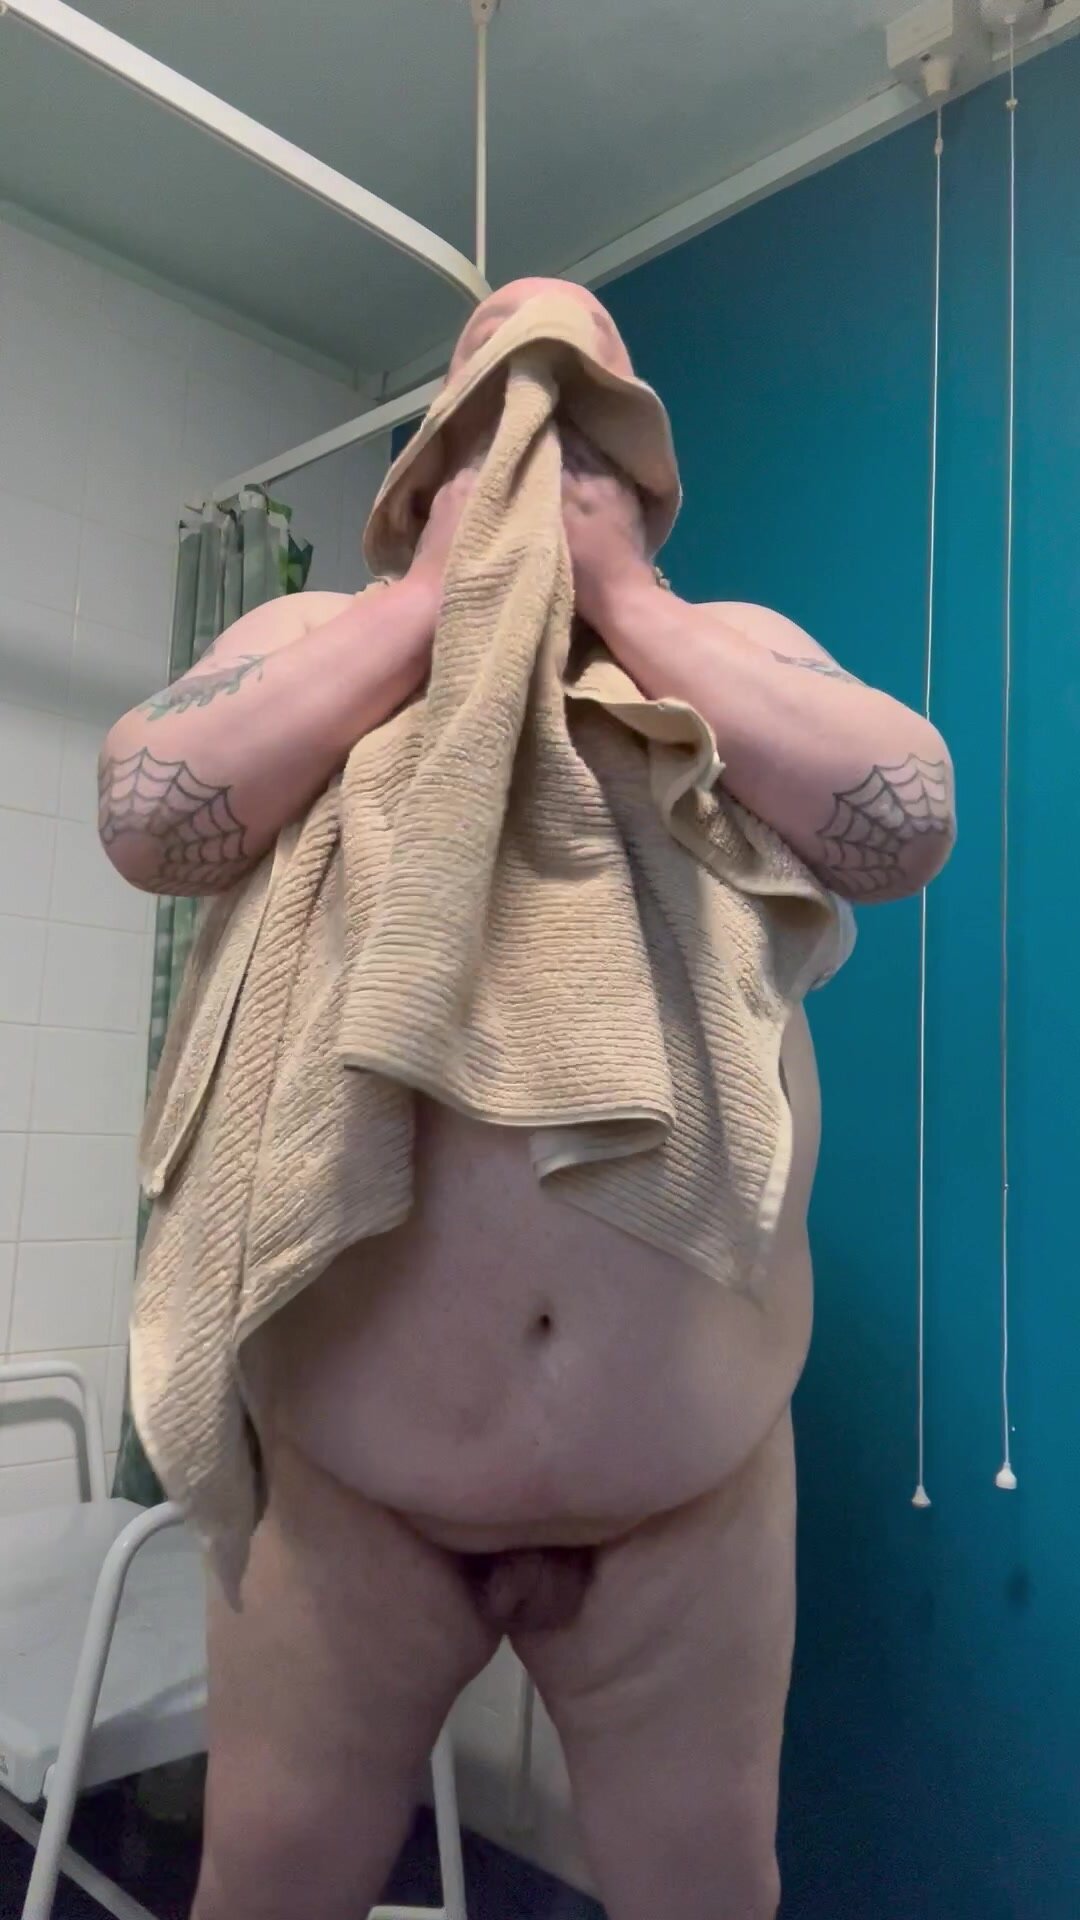 Towel down the pig